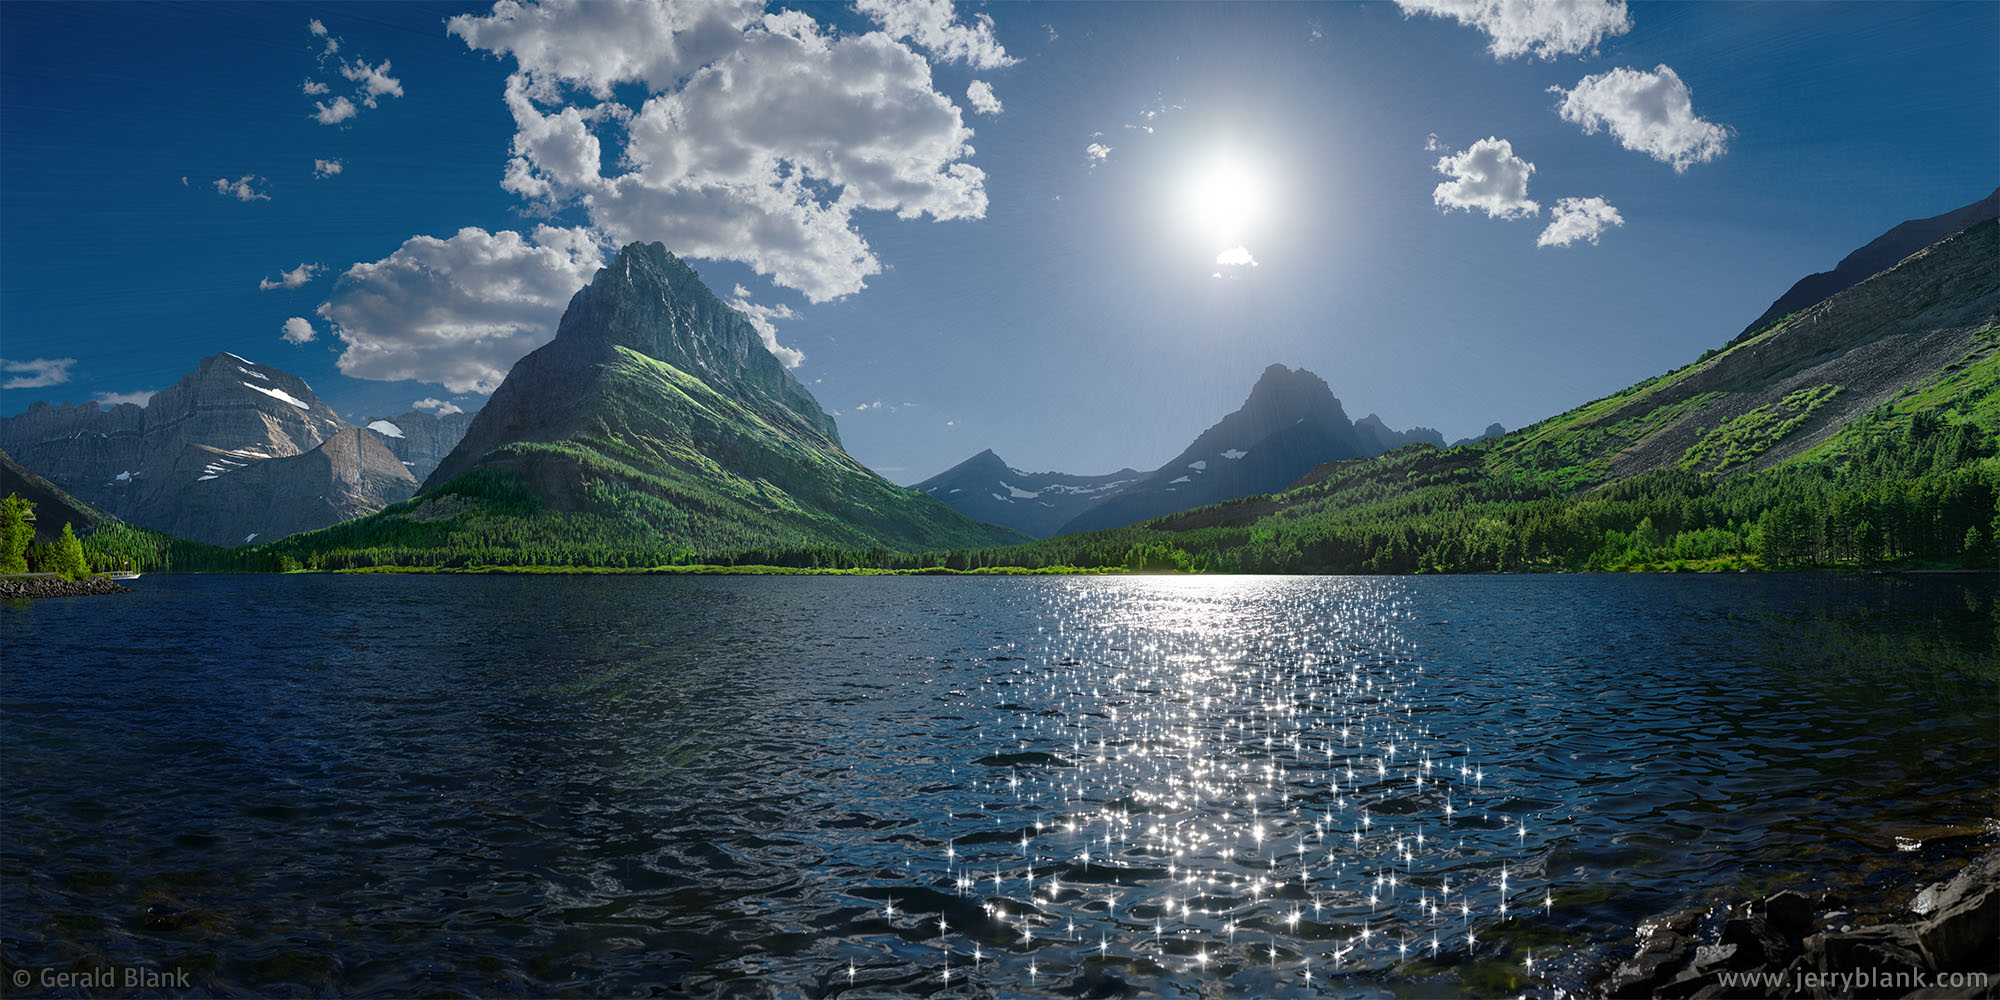 #67962 - The evening sun sparkles on Swiftcurrent Lake in Glacier National Park, Montana. Grinnell Point is seen at center-left, and Mount Wilbur is visible below the sun - photo by Jerry Blank